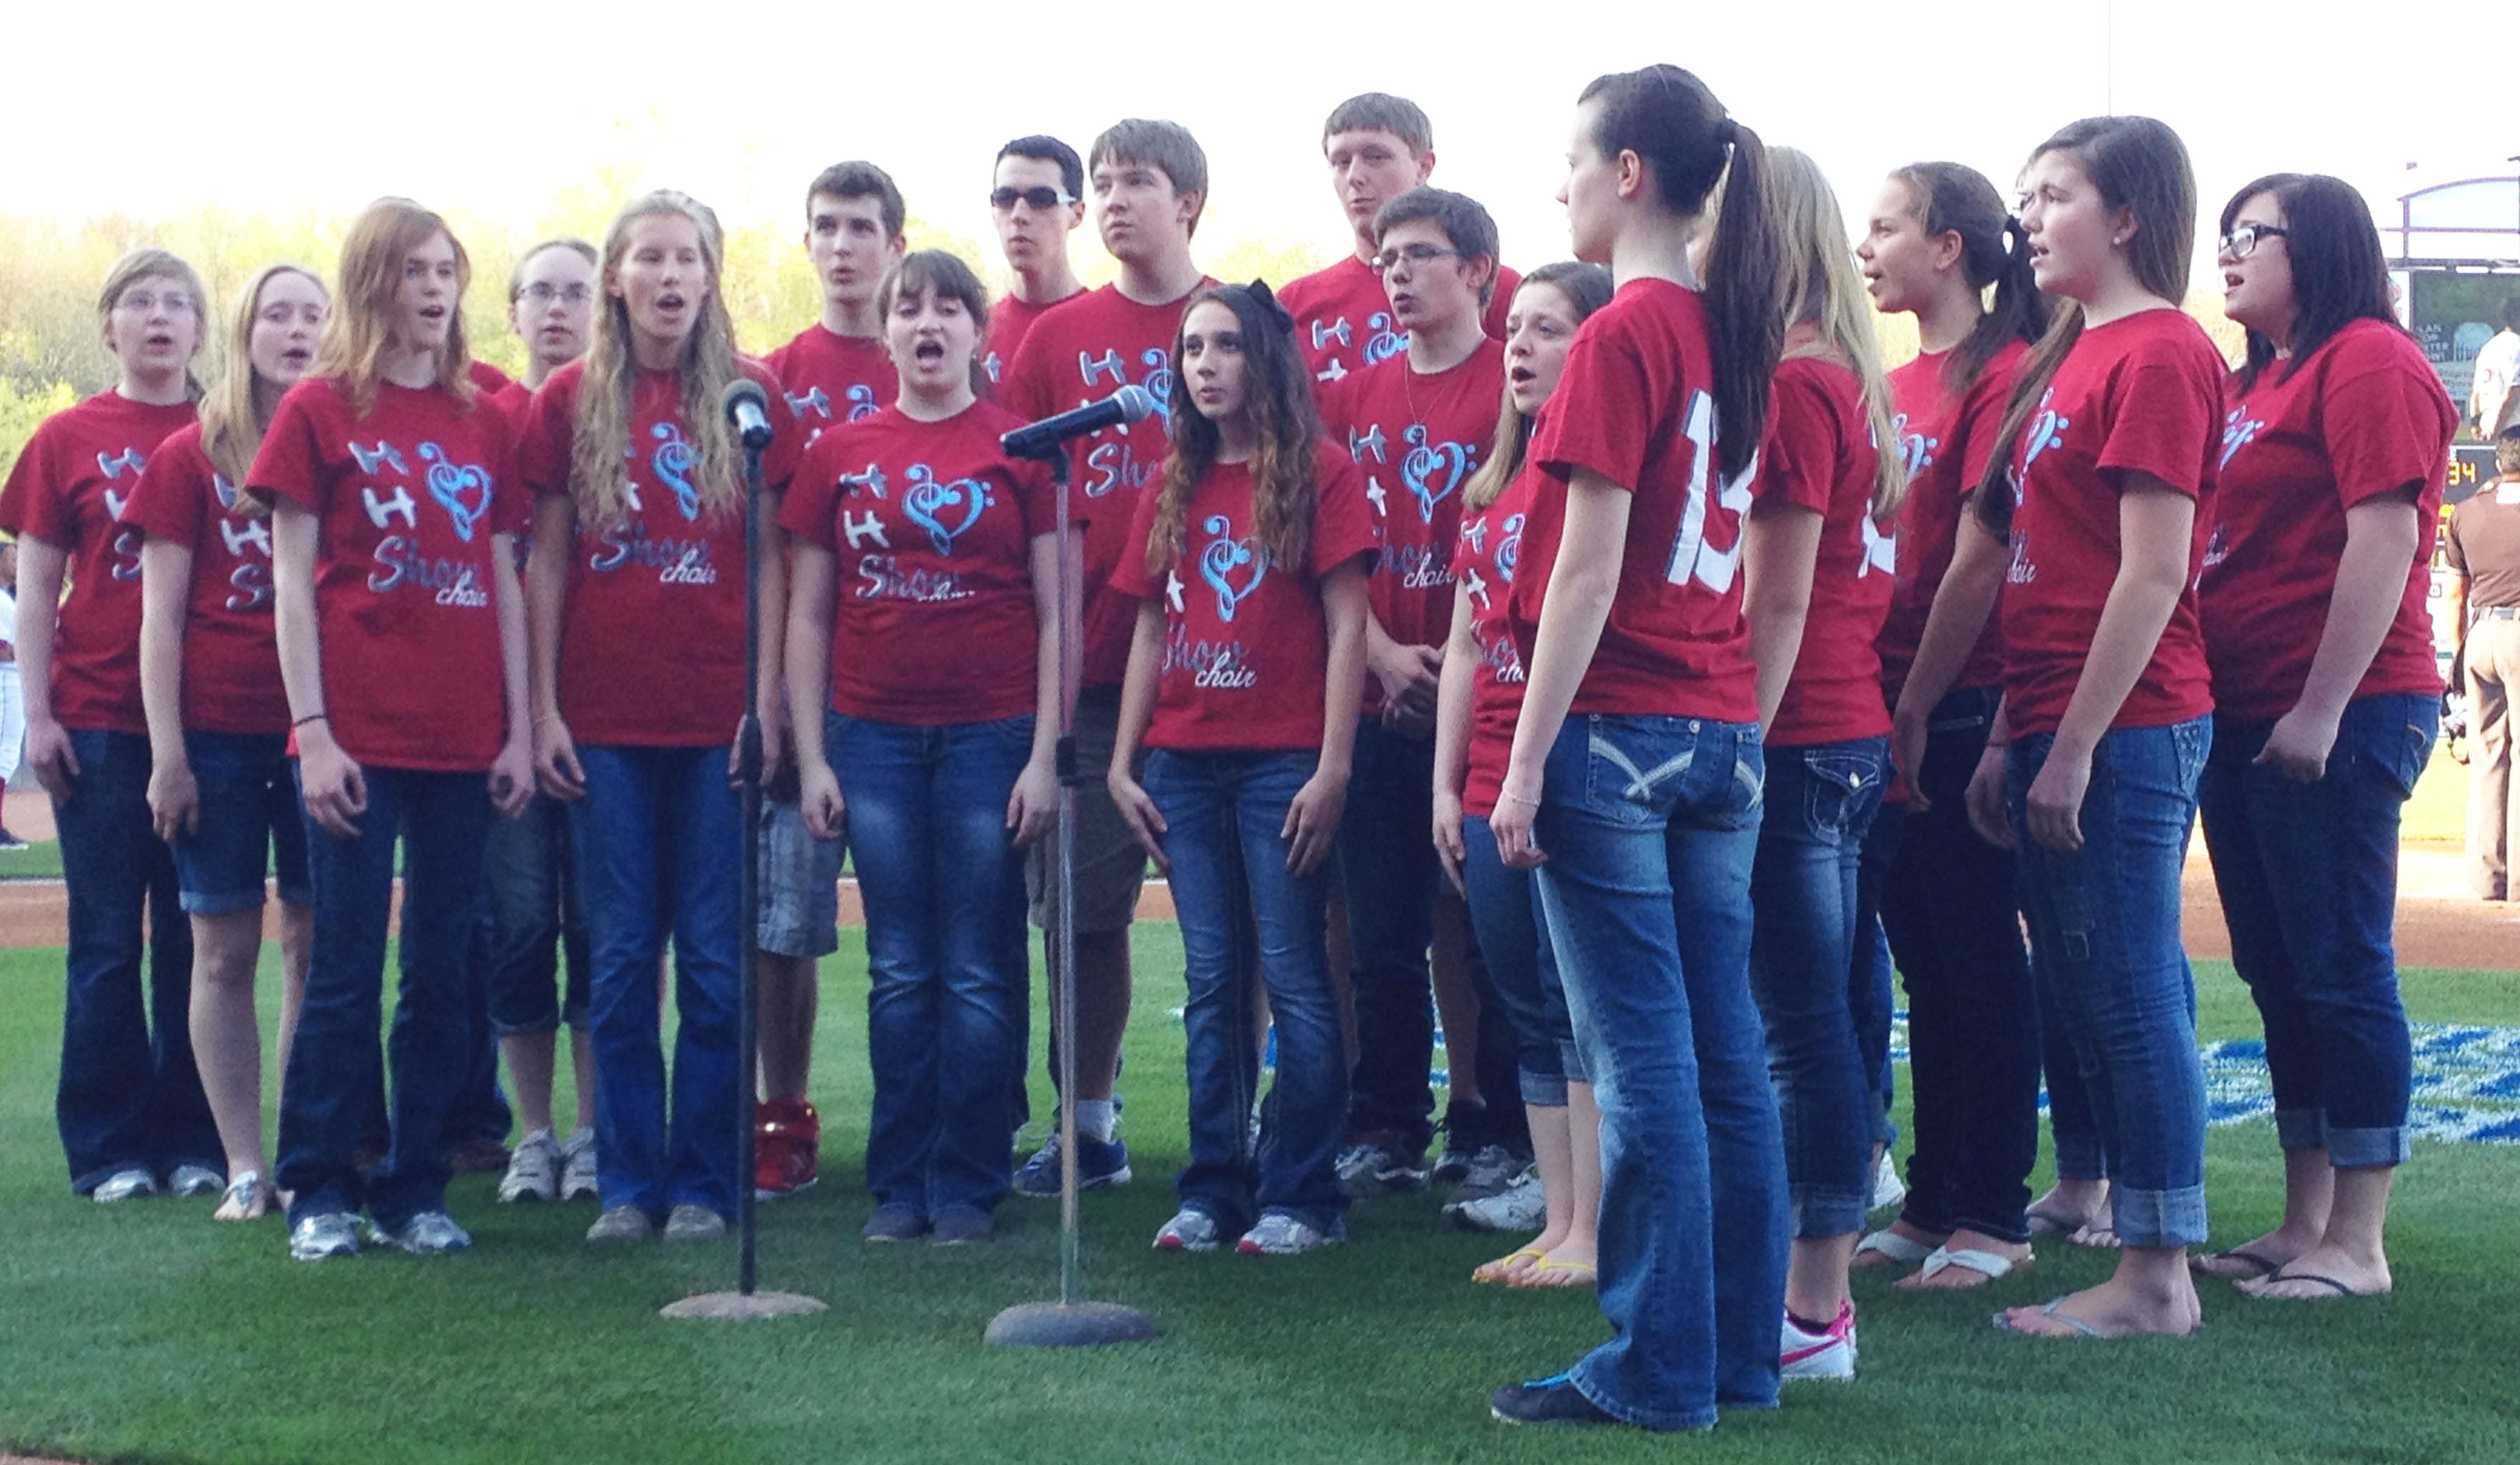 Pictured: HHS Show Choir singing National Anthem at Timber Rattler's game on May 14th